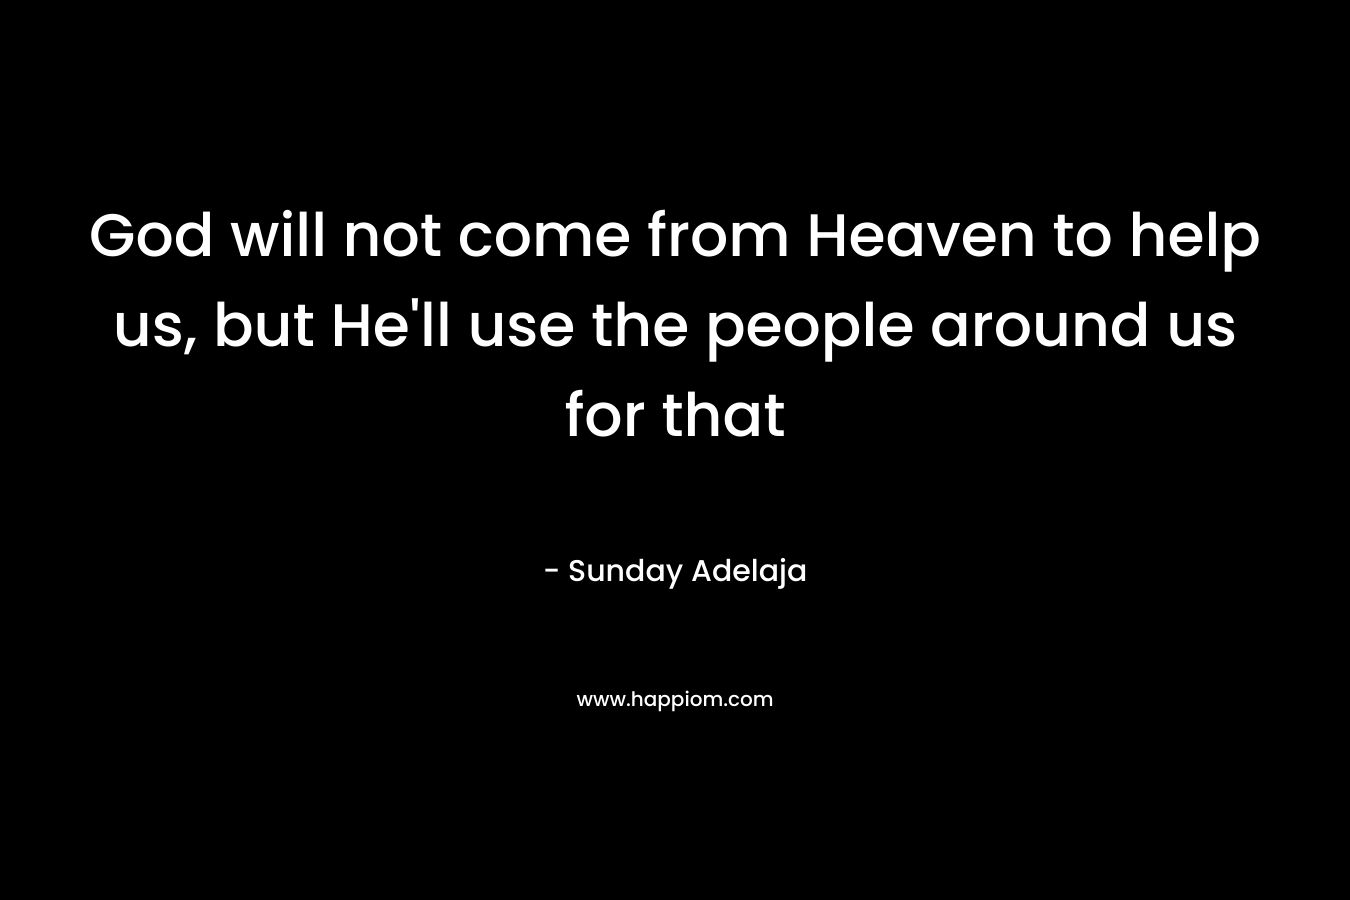 God will not come from Heaven to help us, but He'll use the people around us for that